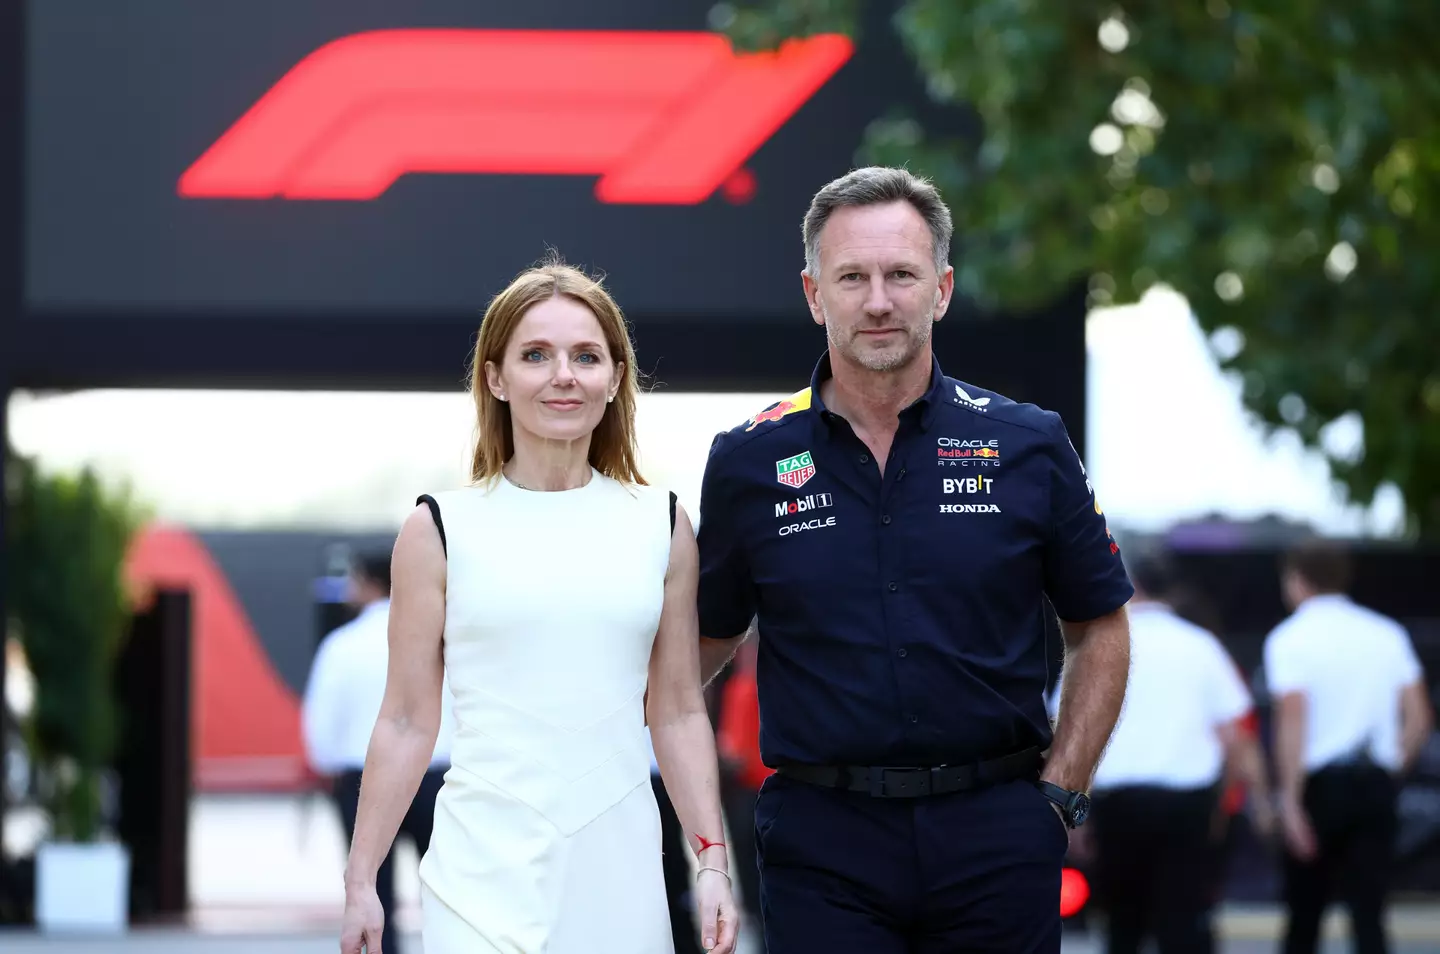 Christian Horner was accused of inappropriate behaviour earlier this year. (Clive Rose/Getty Images)